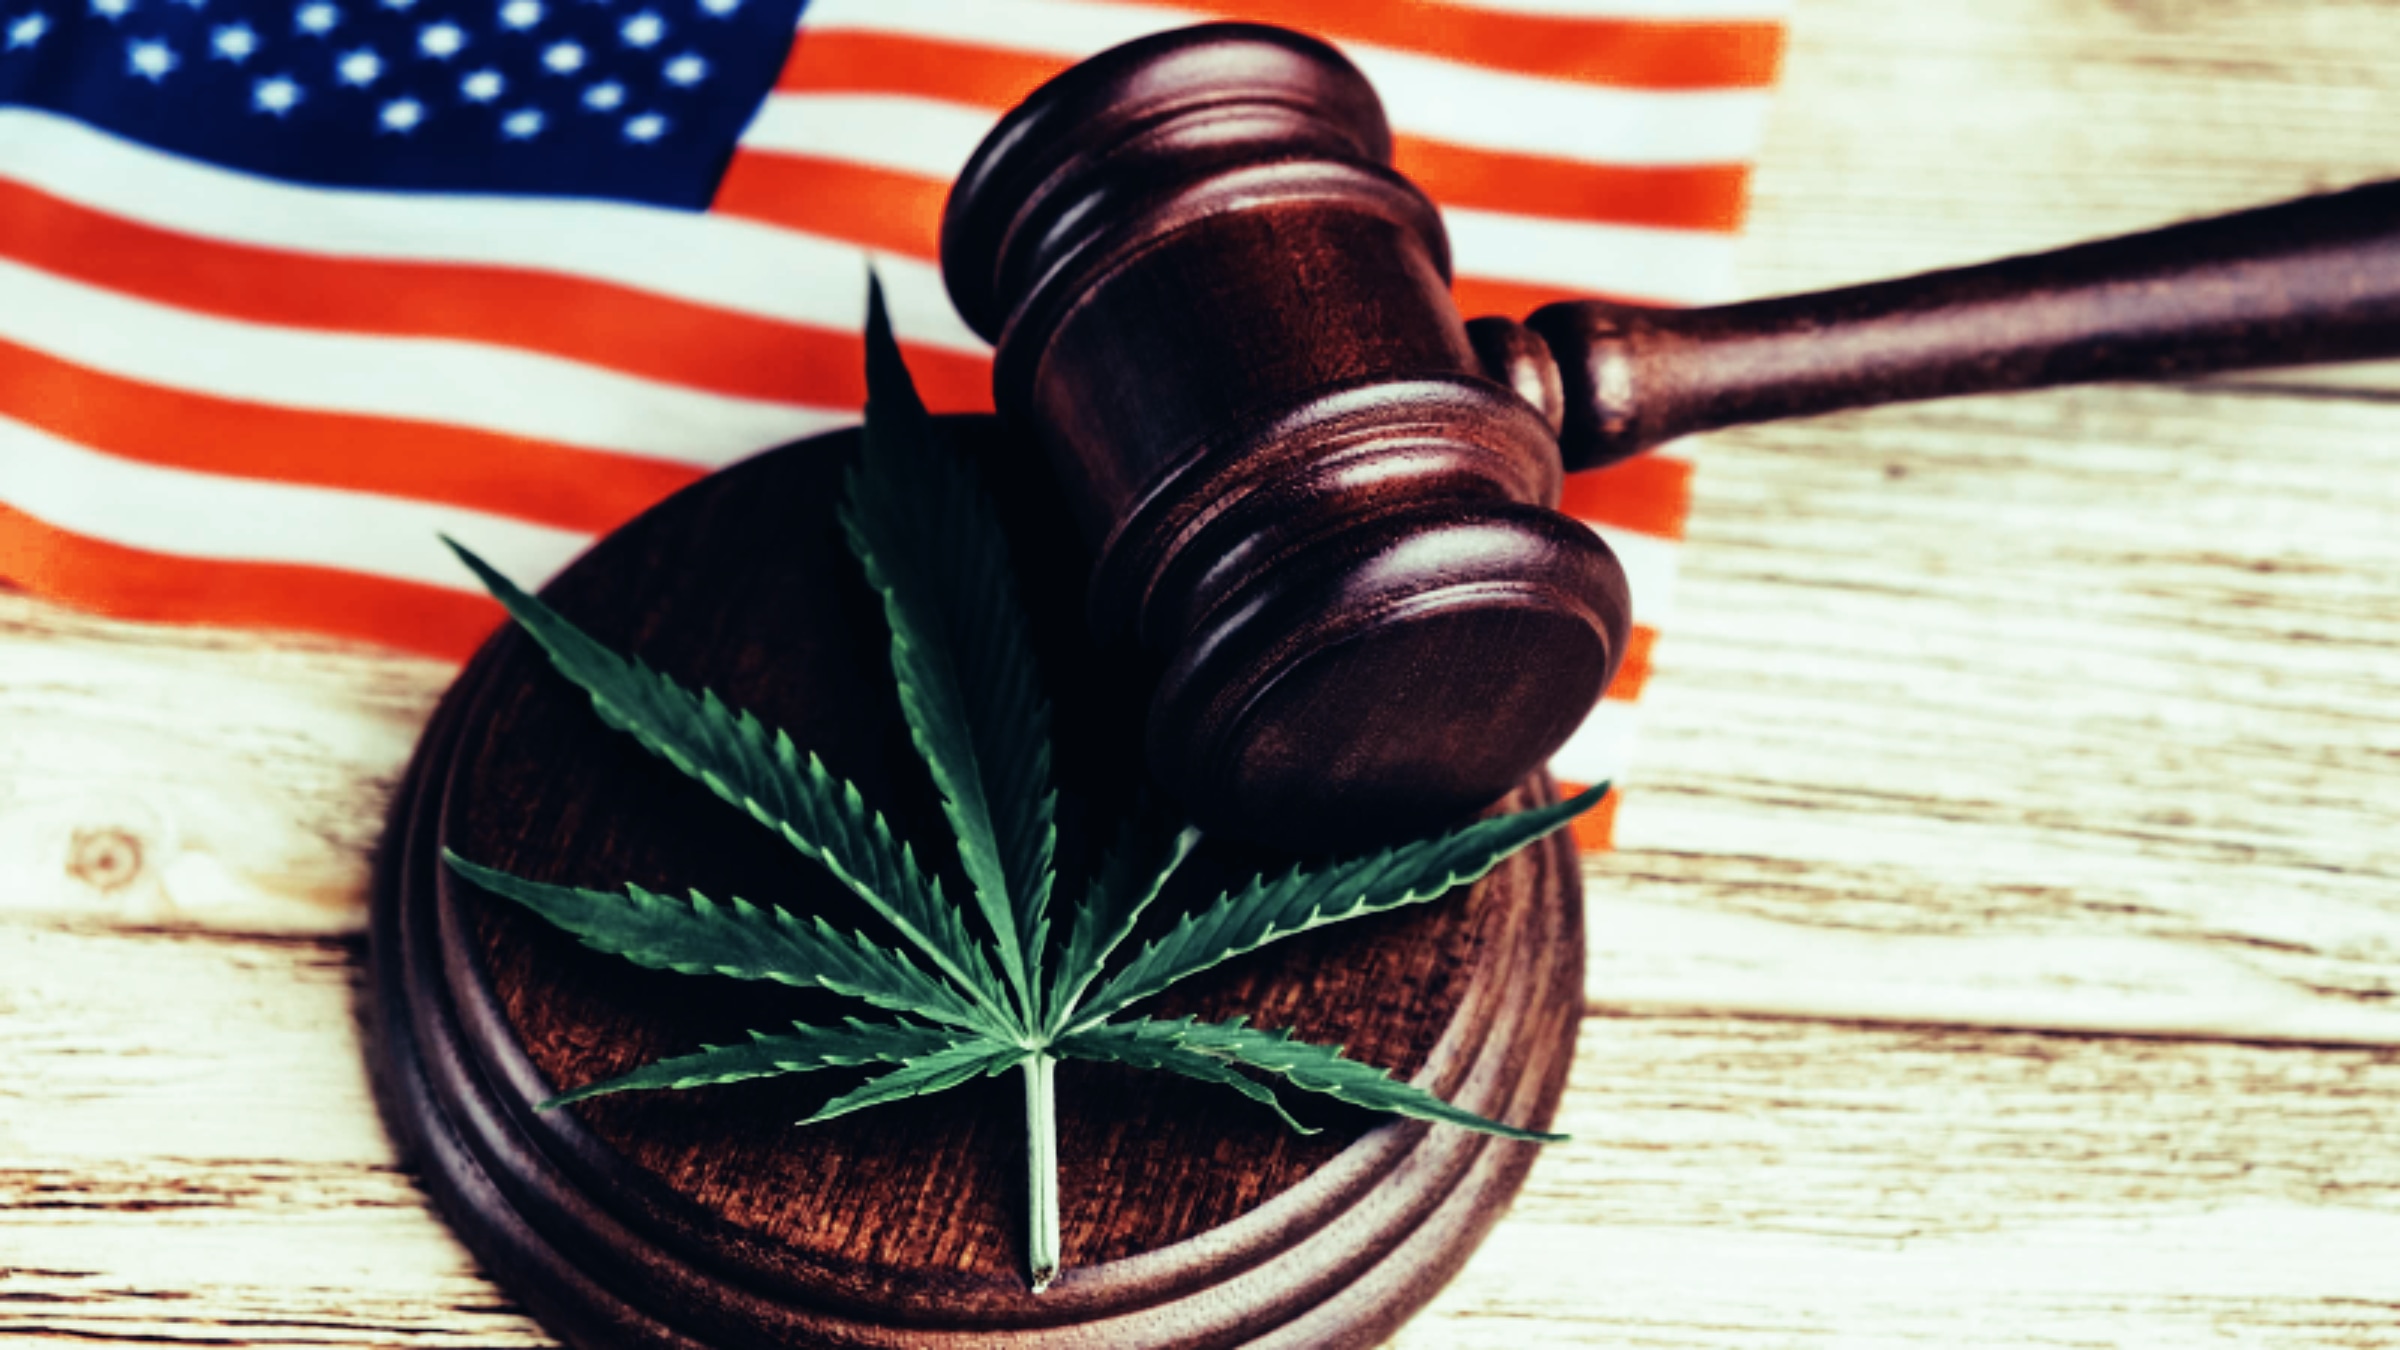 Where do things stand with Federal Marijuana legalization?